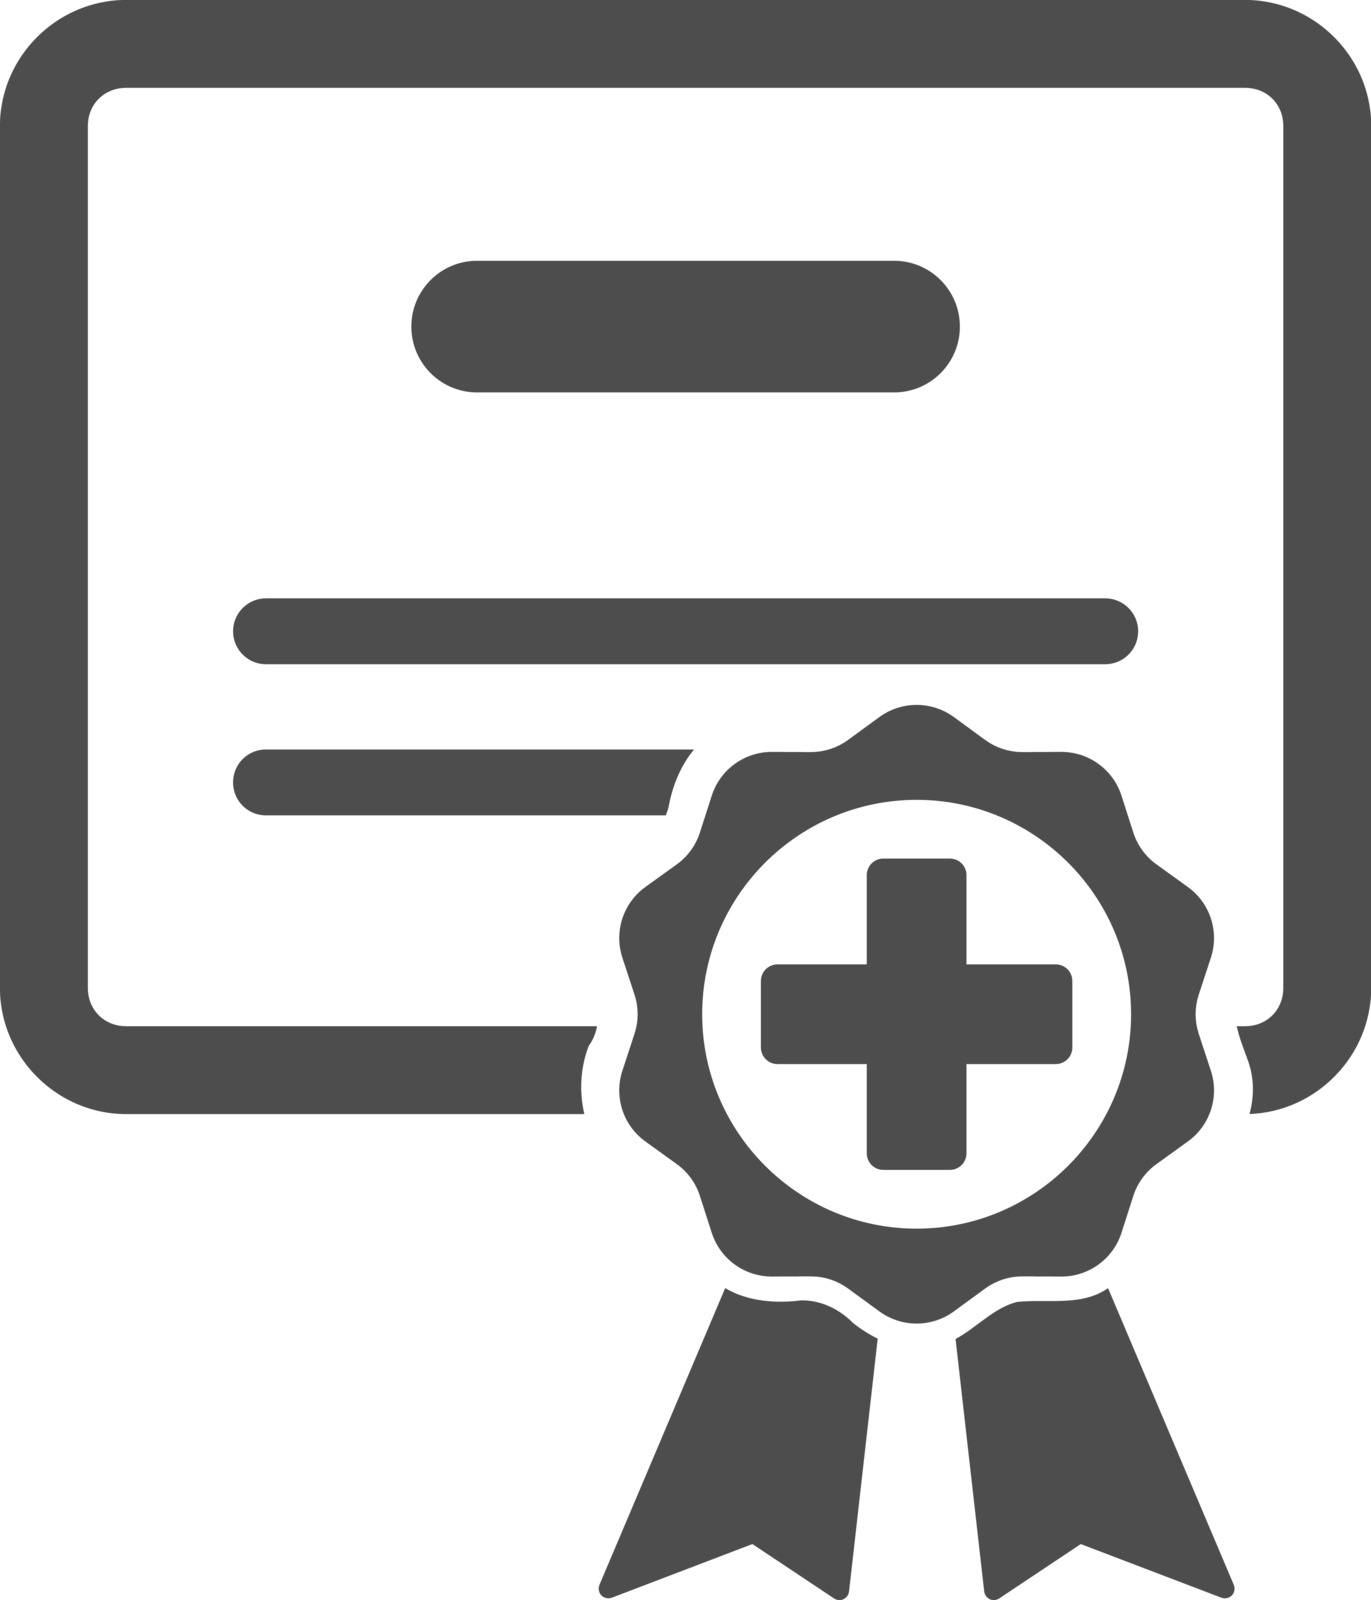 Medical Certificate vector icon. Style is flat symbol, gray color, rounded angles, white background.